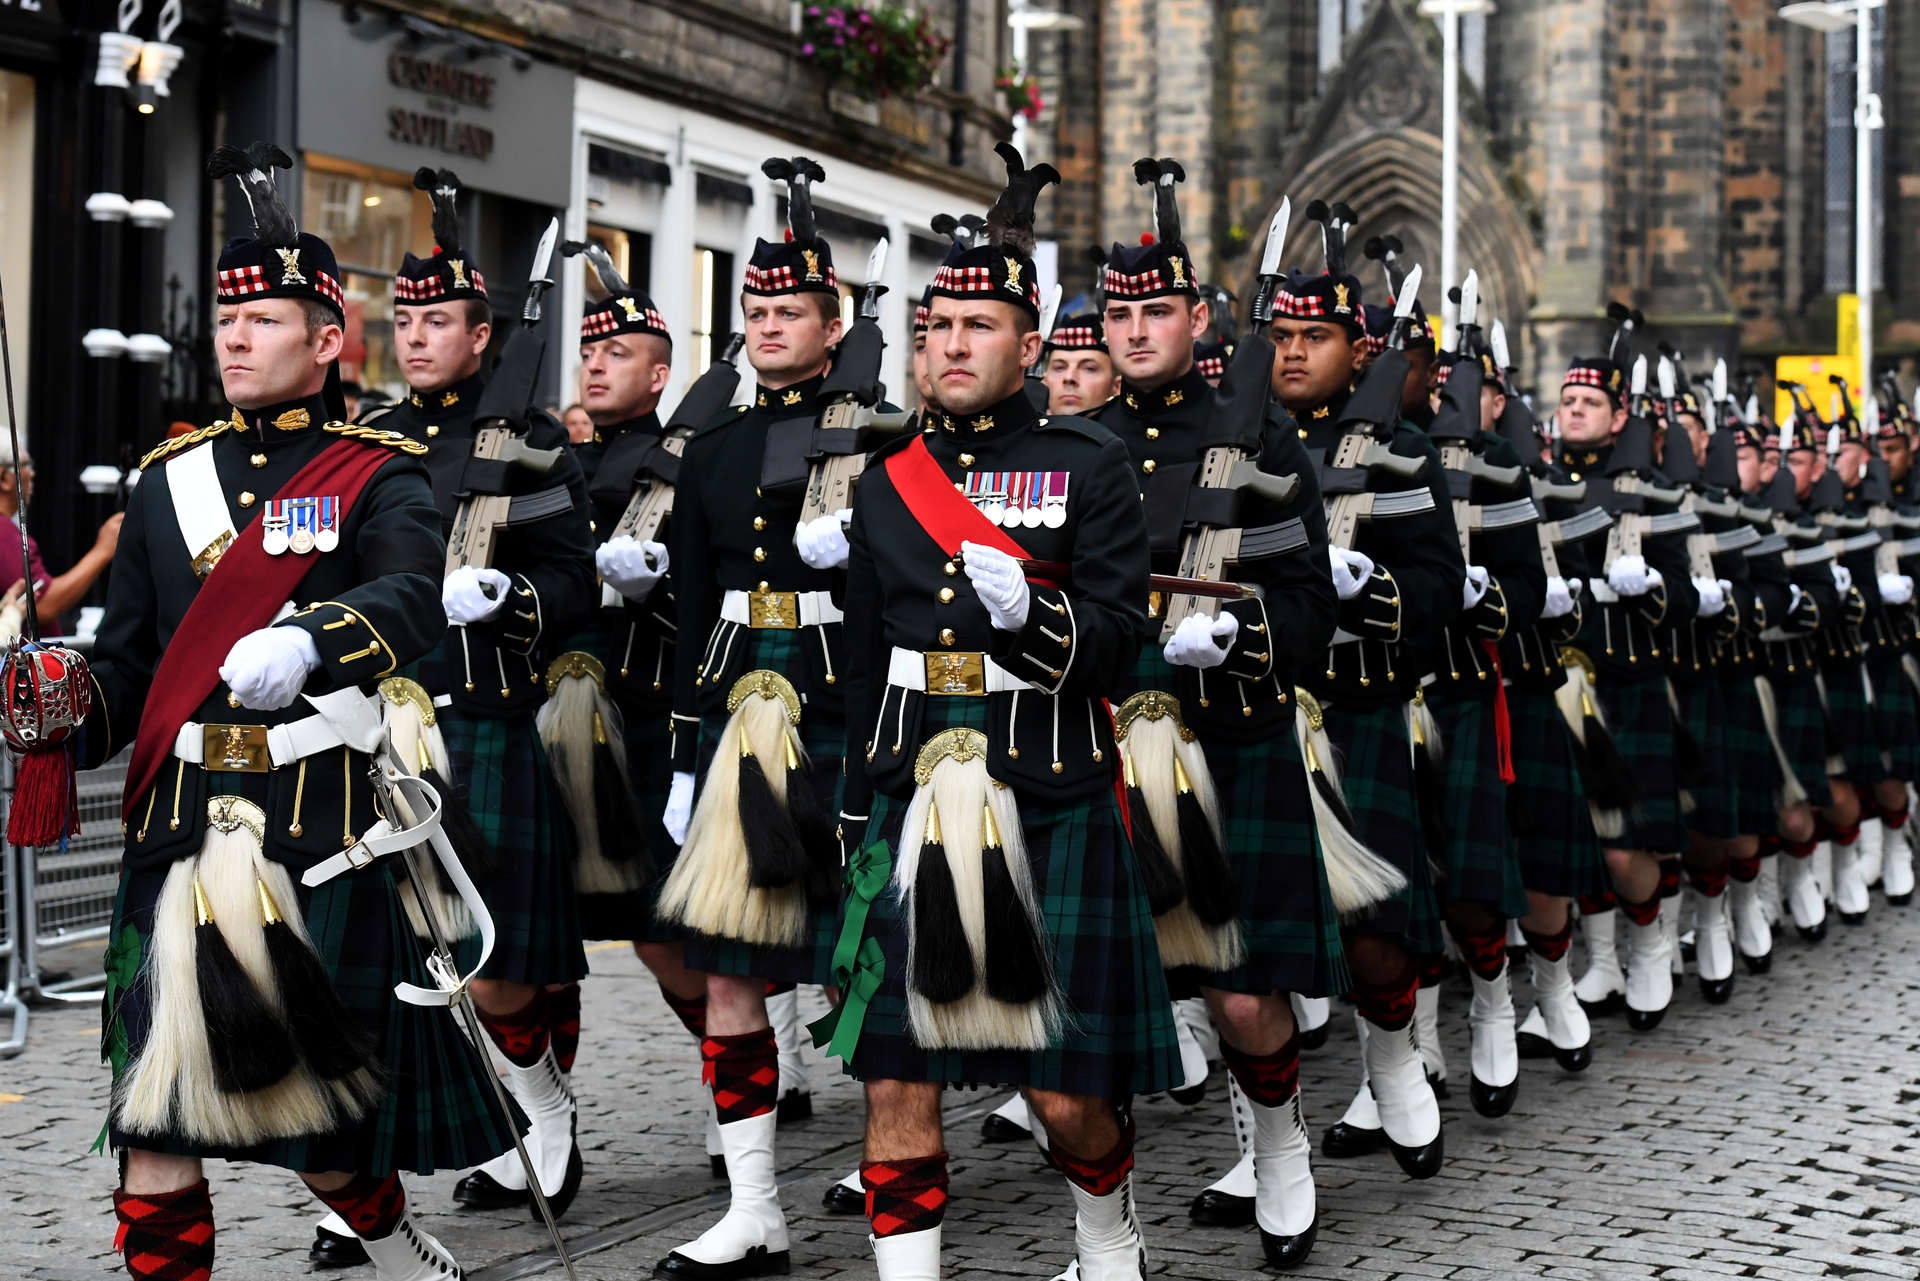 The Royal Marines arrived in Edinburgh for the proclamation of Charles III as King. (Image: Mark Scates / SNS Group)